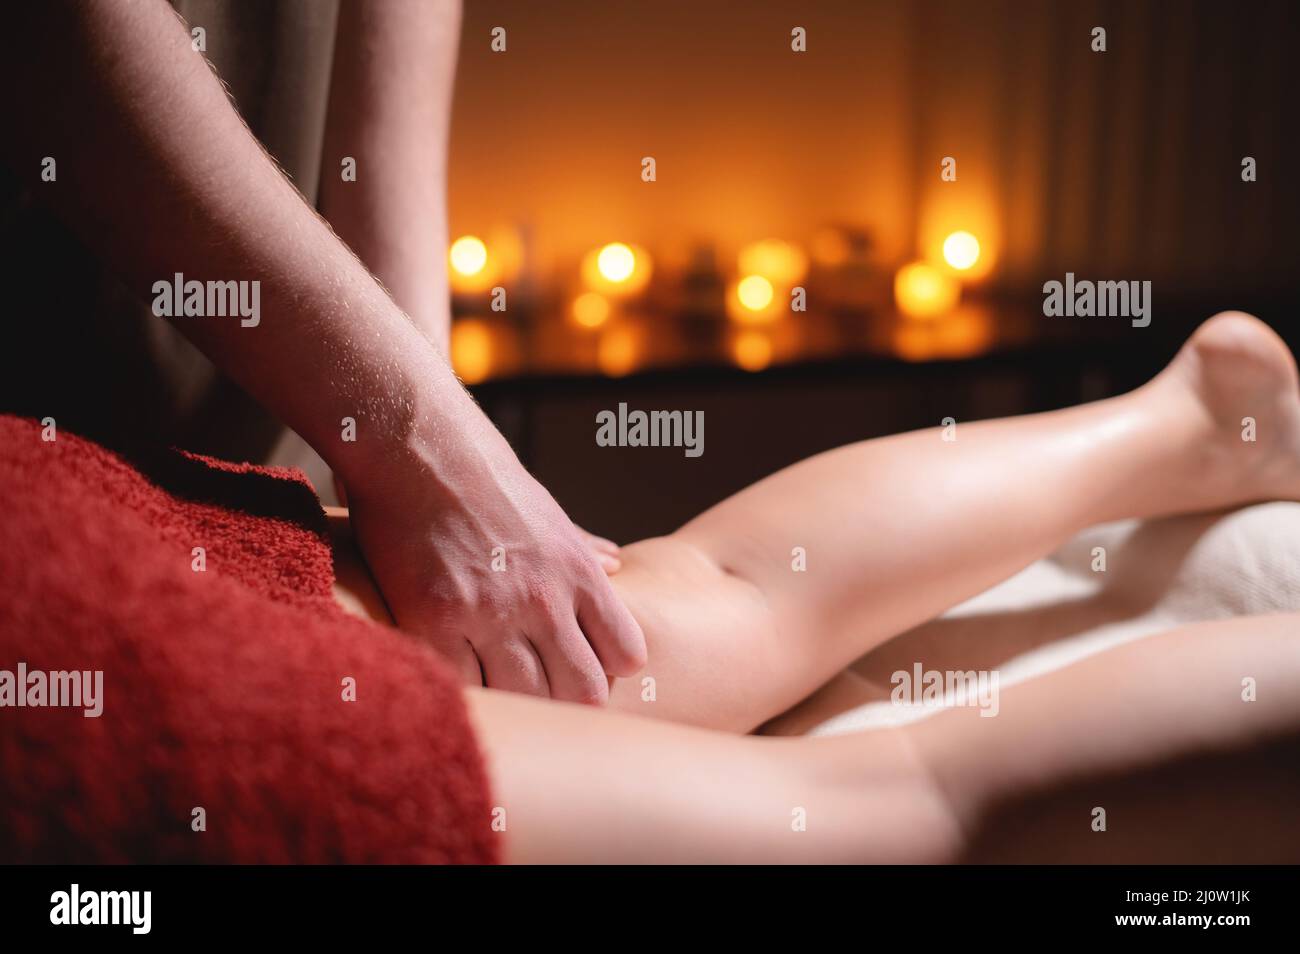 Close-up professional massage of the female hip in the dark room of the spa salon against the background of burning candles. The Stock Photo